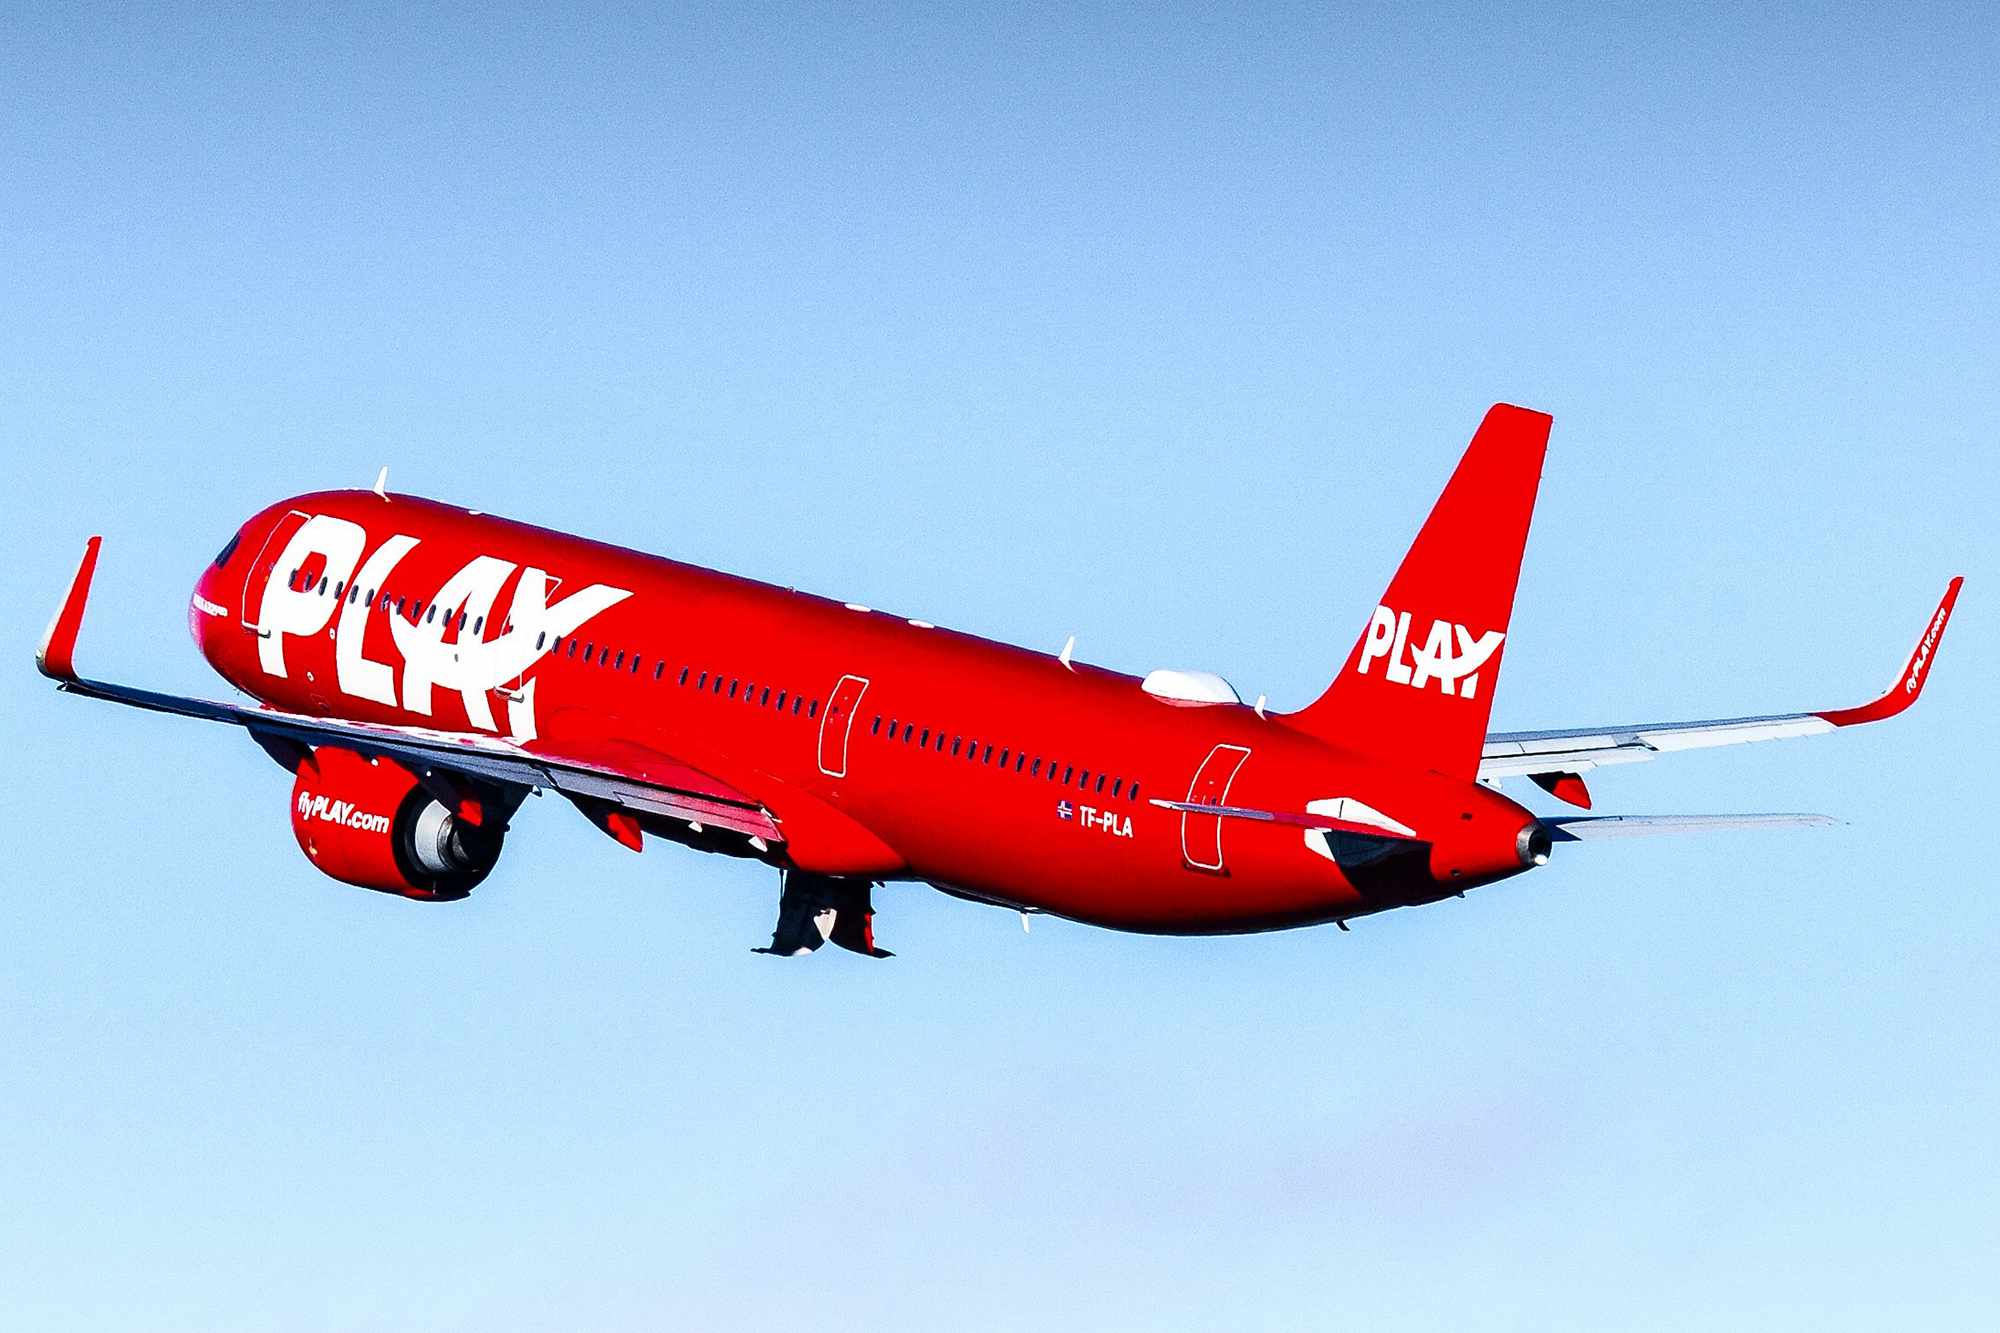 This Low-cost Airline Has Flights to Europe Starting at $99 — but You’ll Have to Book Soon